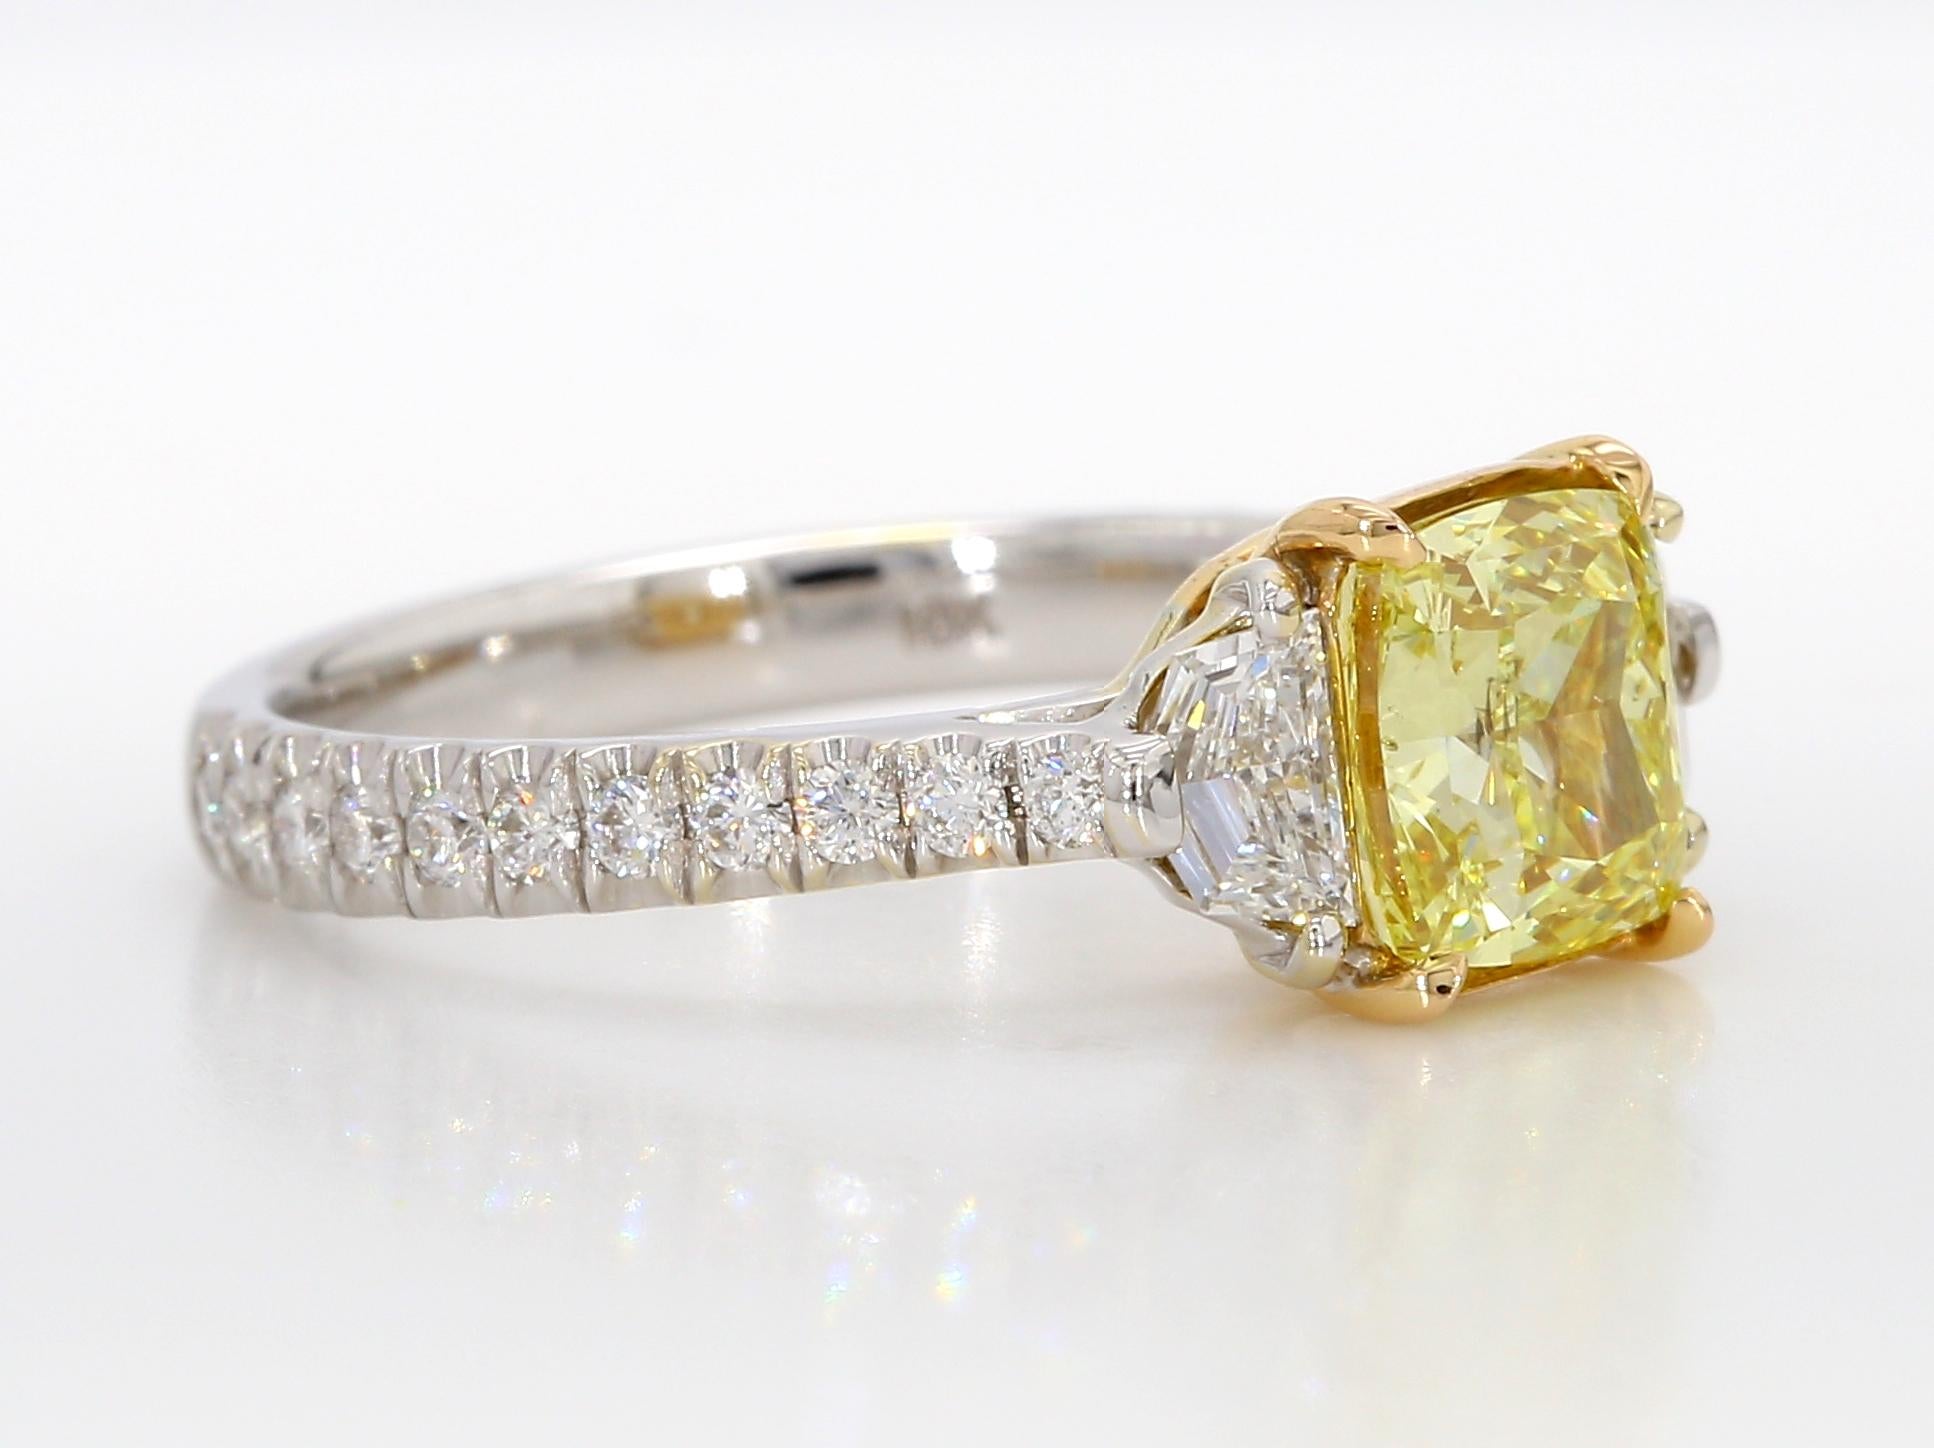 Presenting an exquisite Three-Stone Engagement Ring showcasing a breathtaking 1.67-carat Fancy Intense Yellow, Cushion-cut diamond. GIA has meticulously certified this diamond as SI2 in clarity. The stones exhibit an excellent polish and an